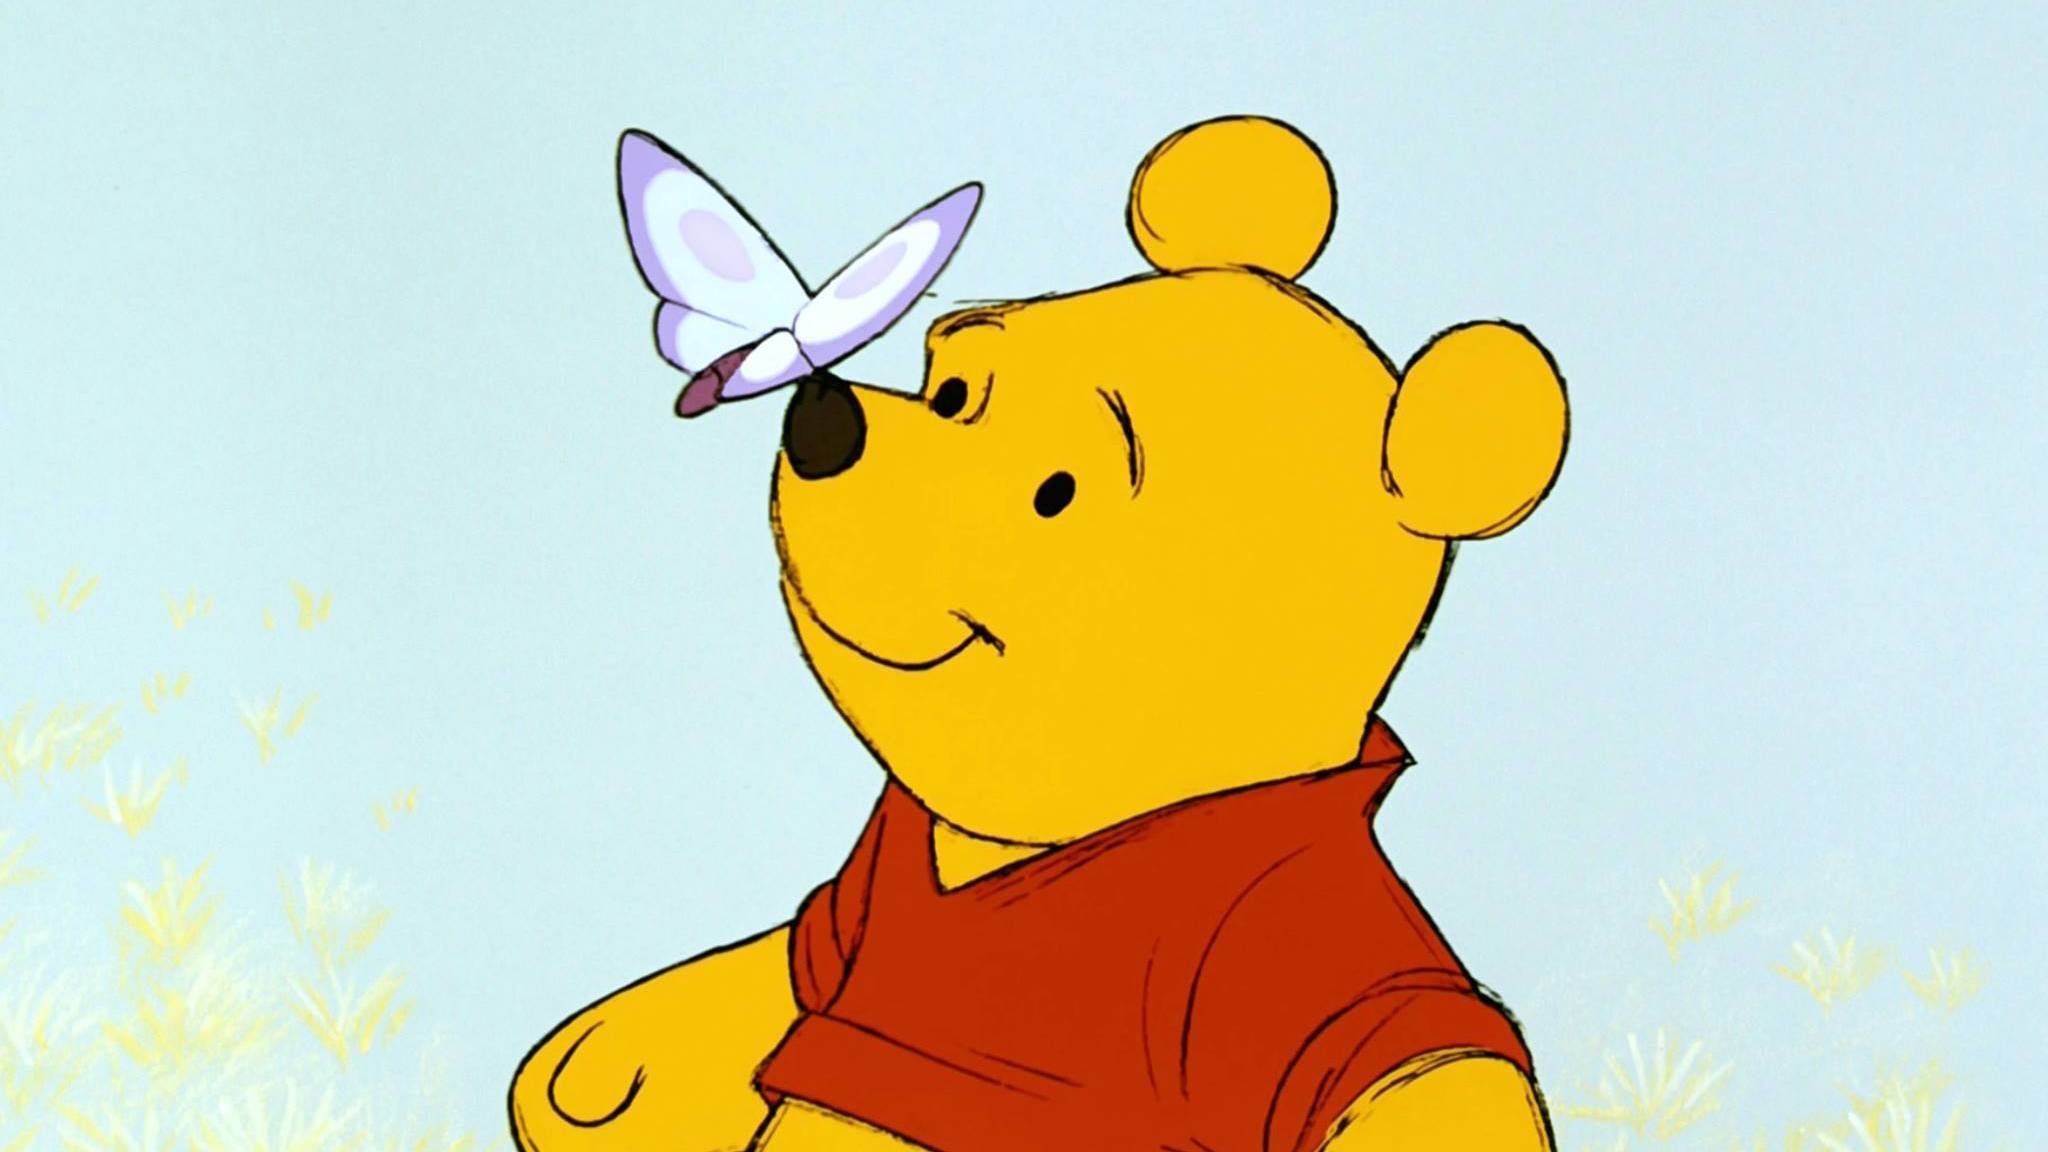 7 Winnie the Pooh Quotes to Make Your Day